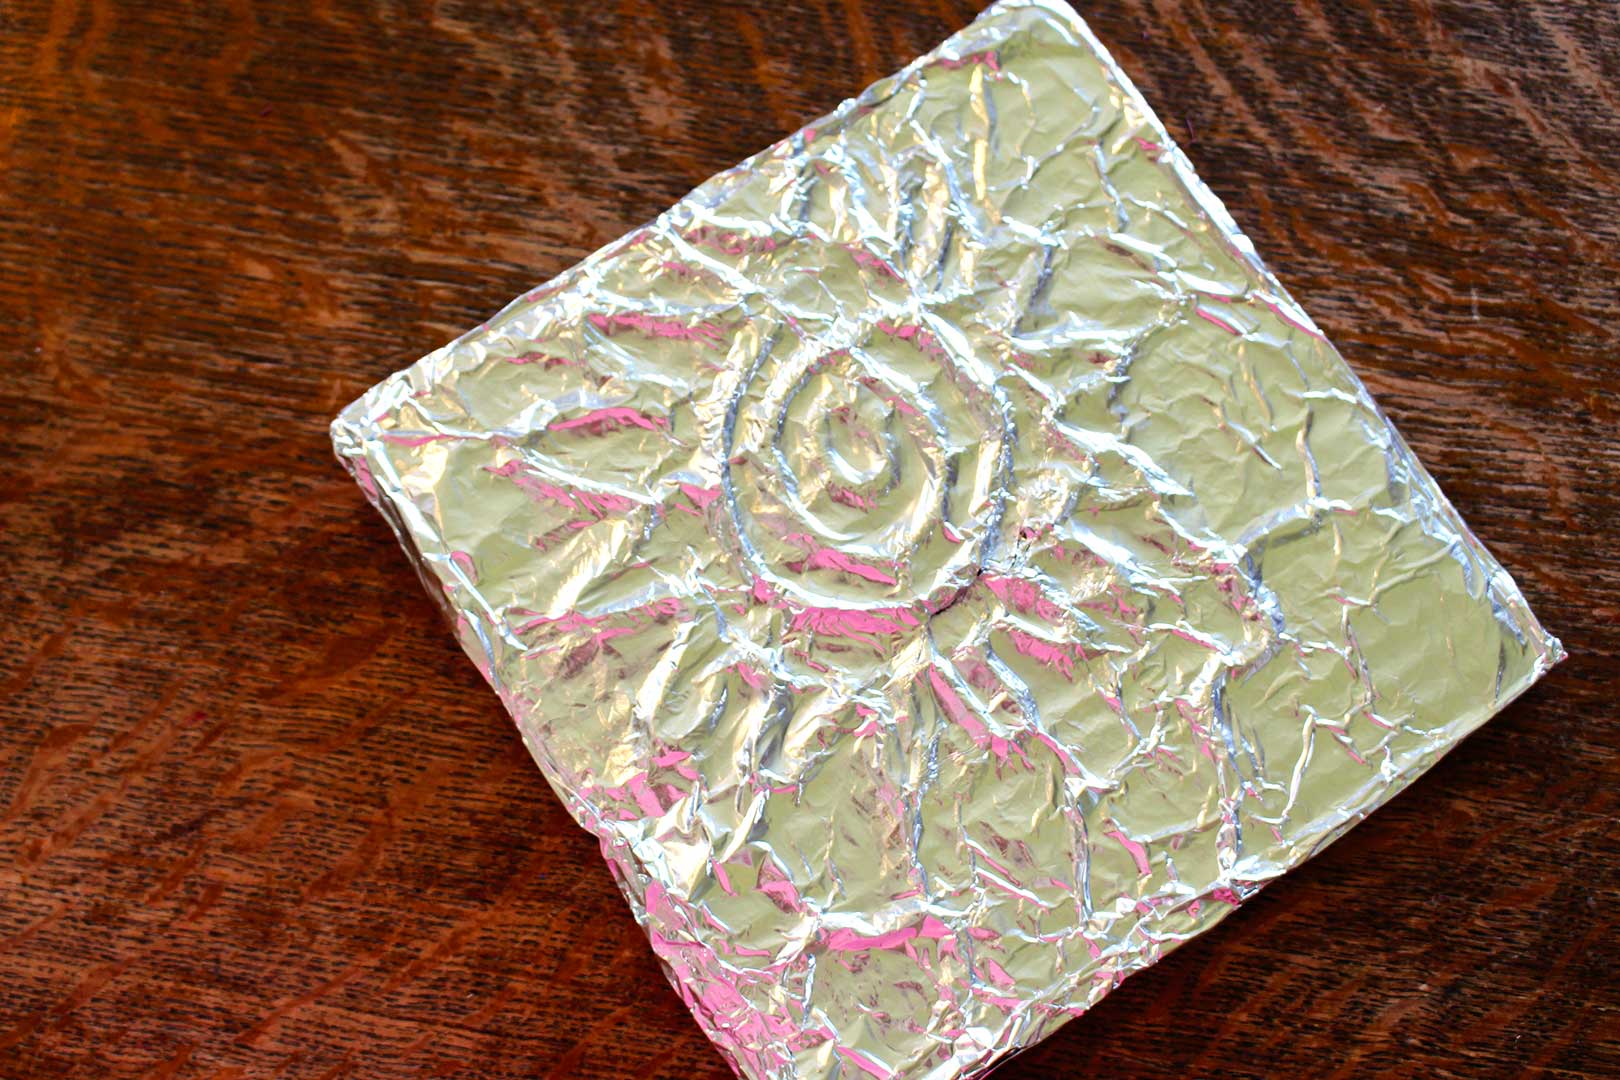 How to Create DIY Embossed Foil Art  Here's an easy way to create your  very own embossed foil art! What styling do you think you'll go for?  #DoItWithDIY #Reels #Explore #FoilArt #